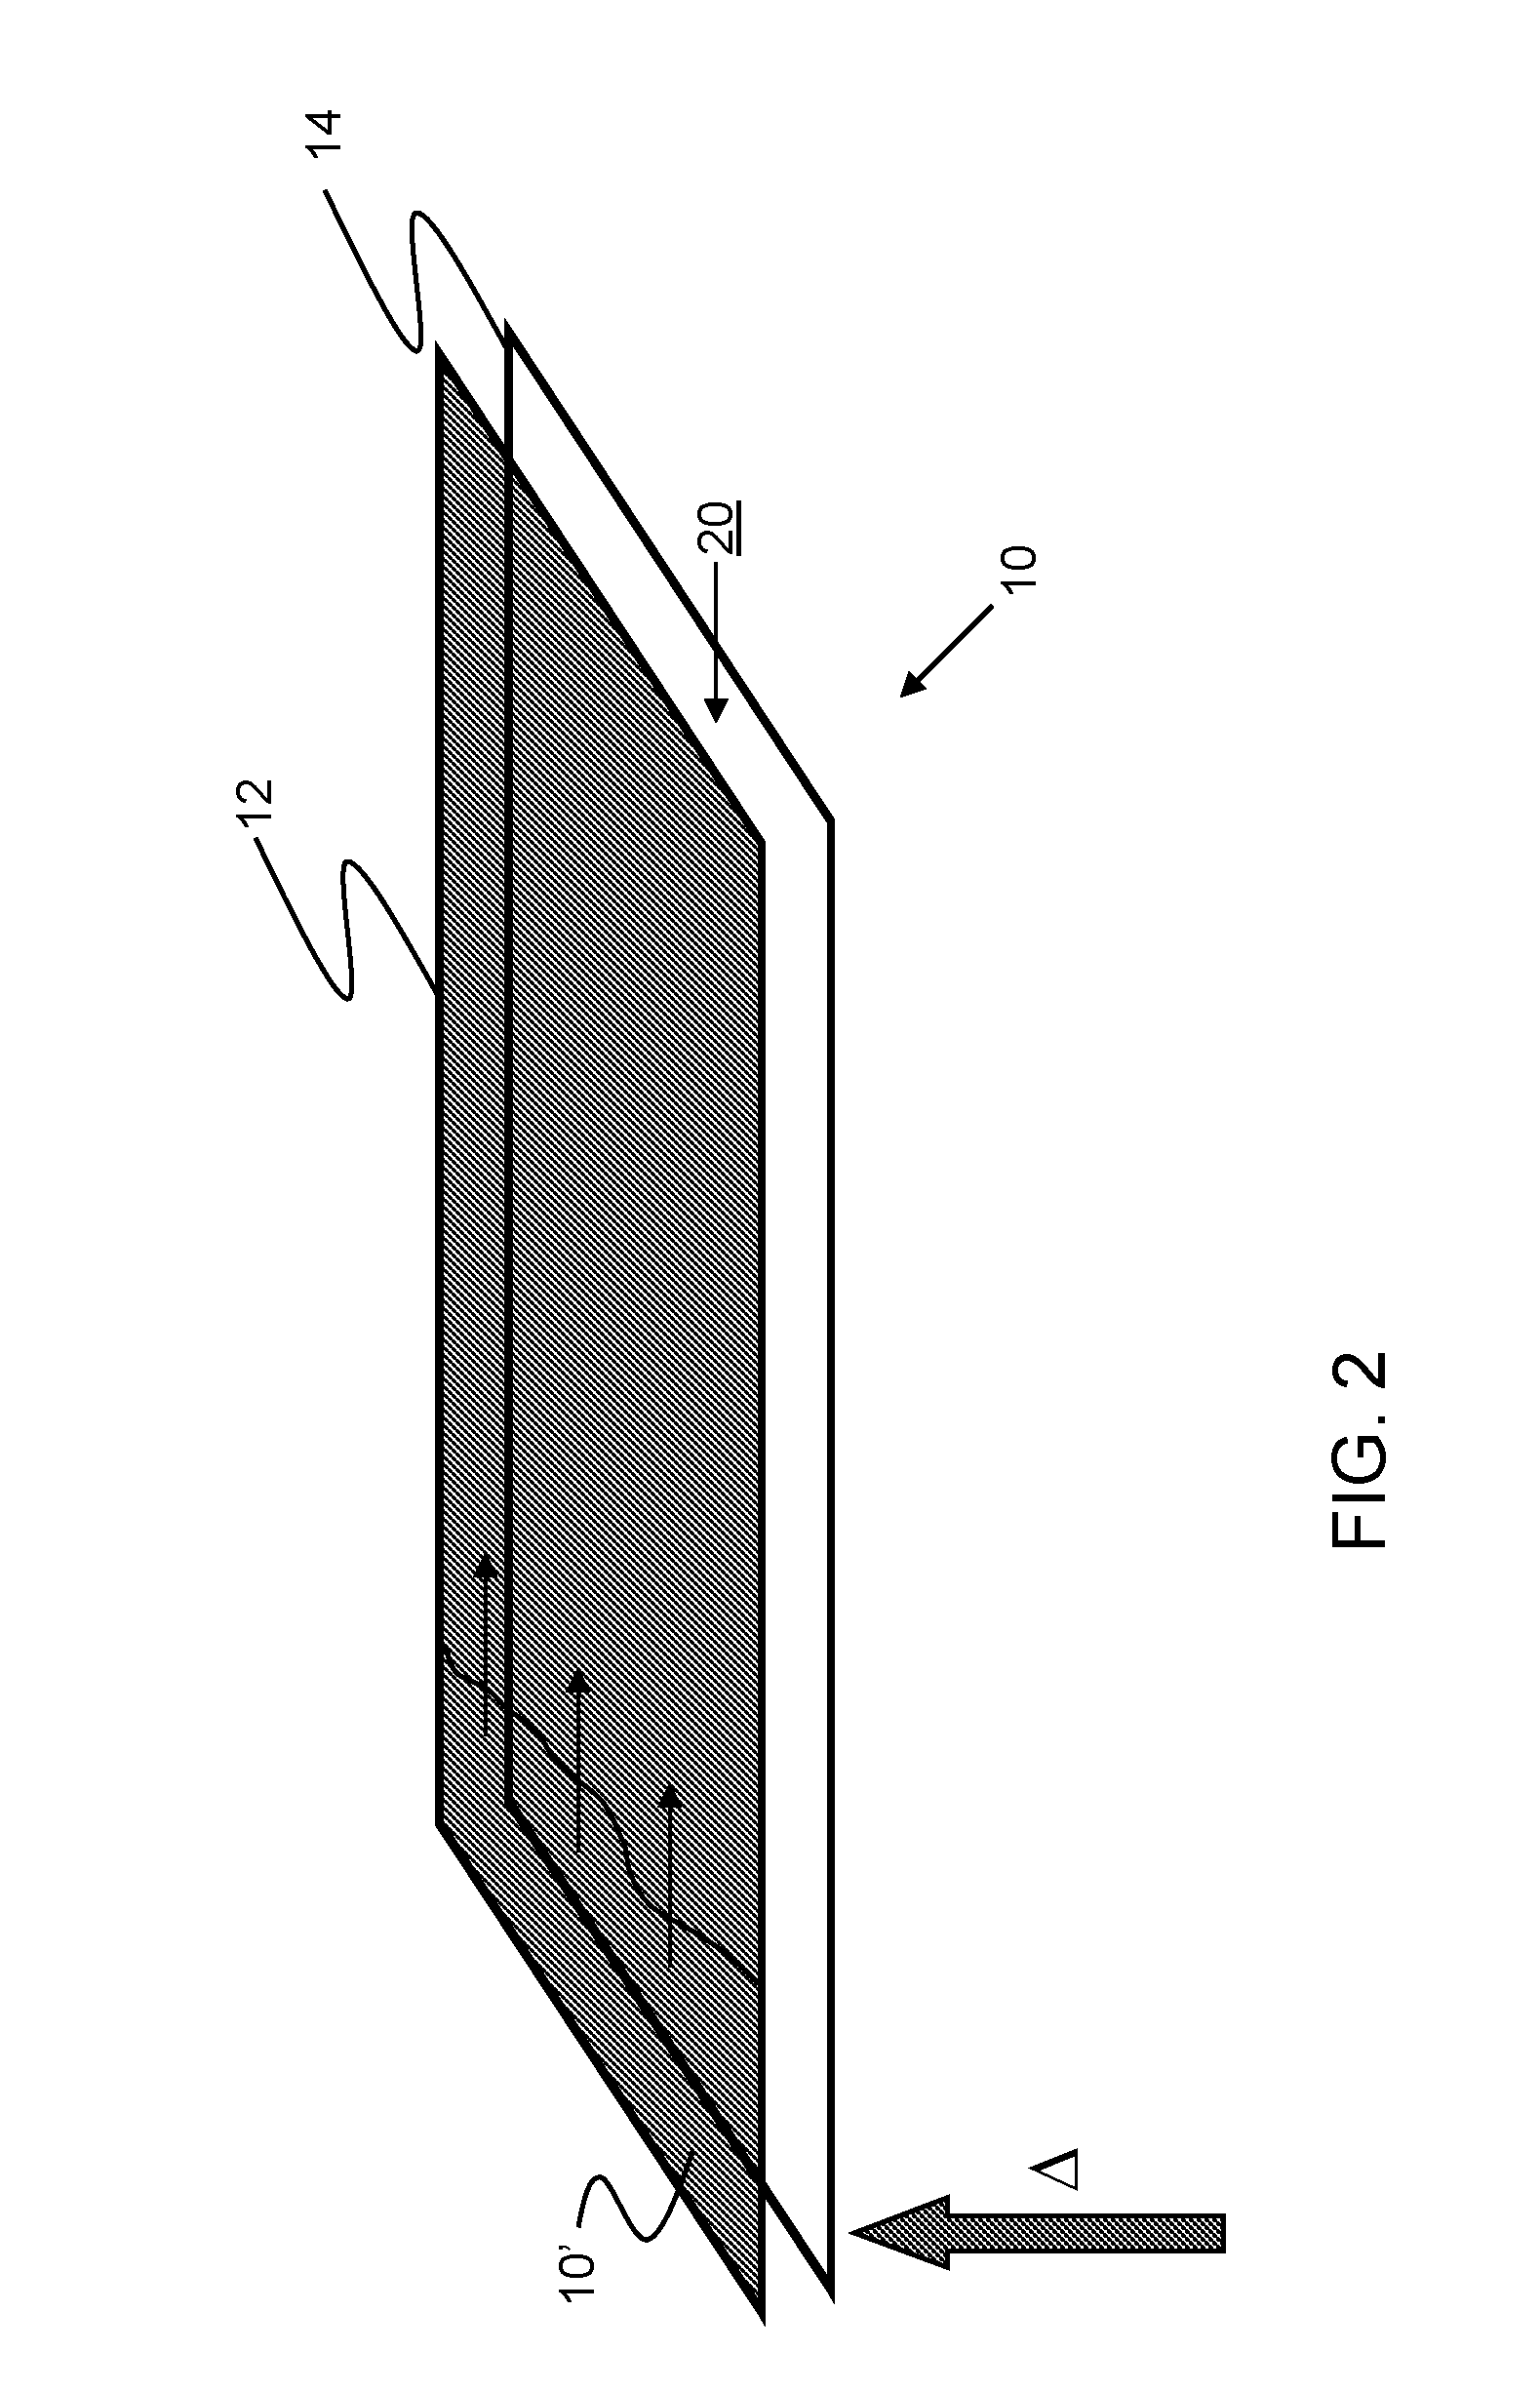 Curing composite materials comprising latent-cure resins